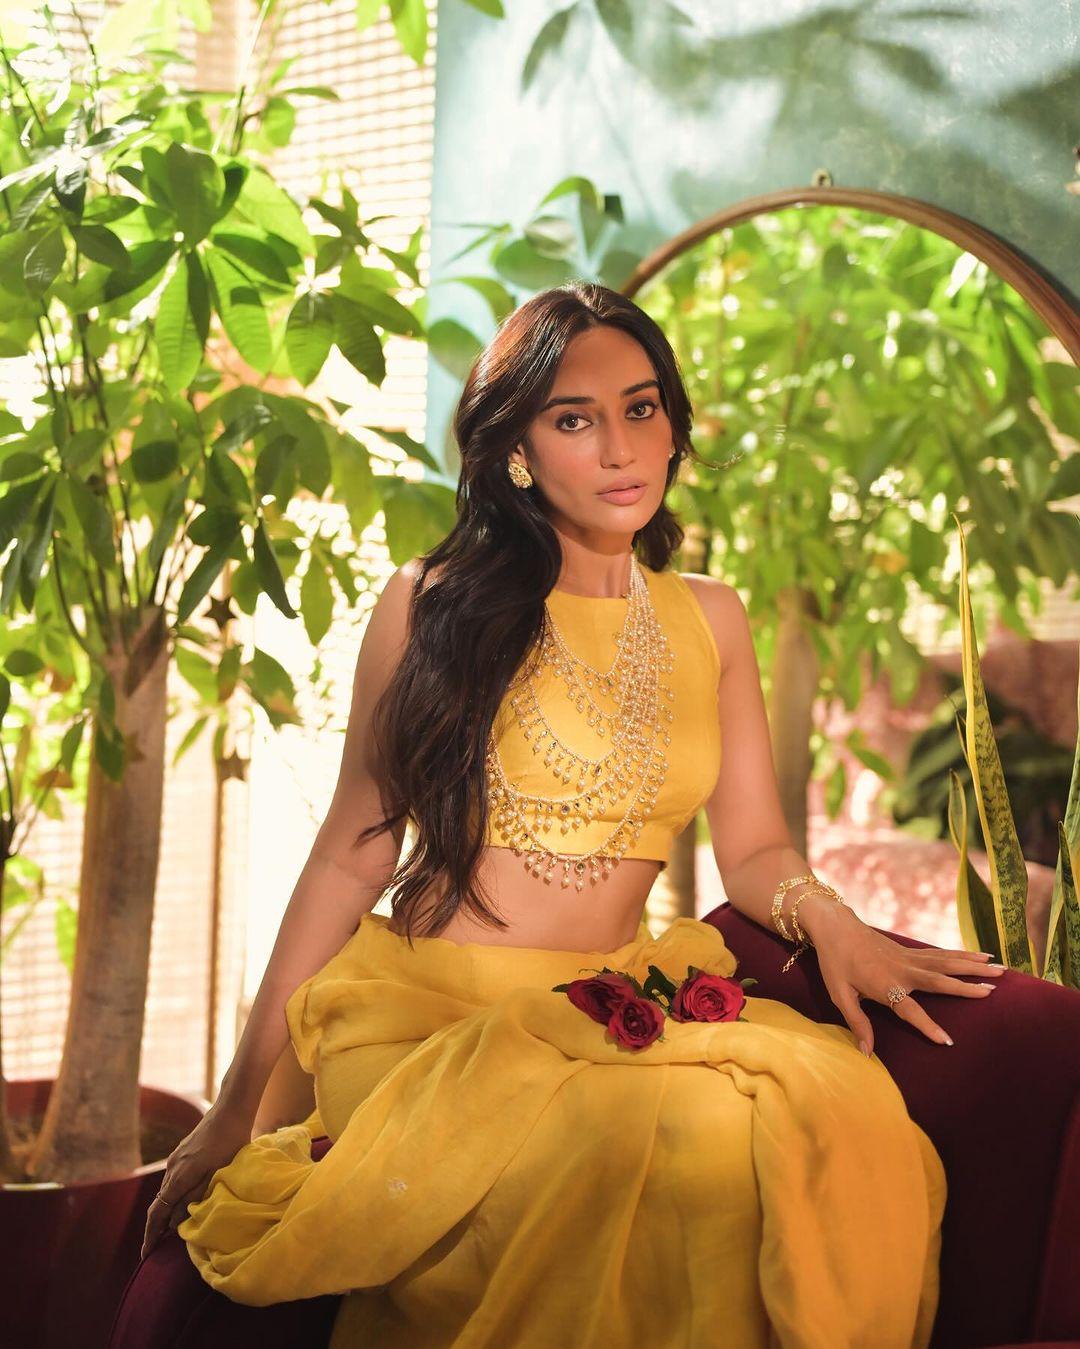 If you are looking for a rather simple approach this summer season to ace your pooja look, then go for Surbhi Jyoti's indo-western outfit